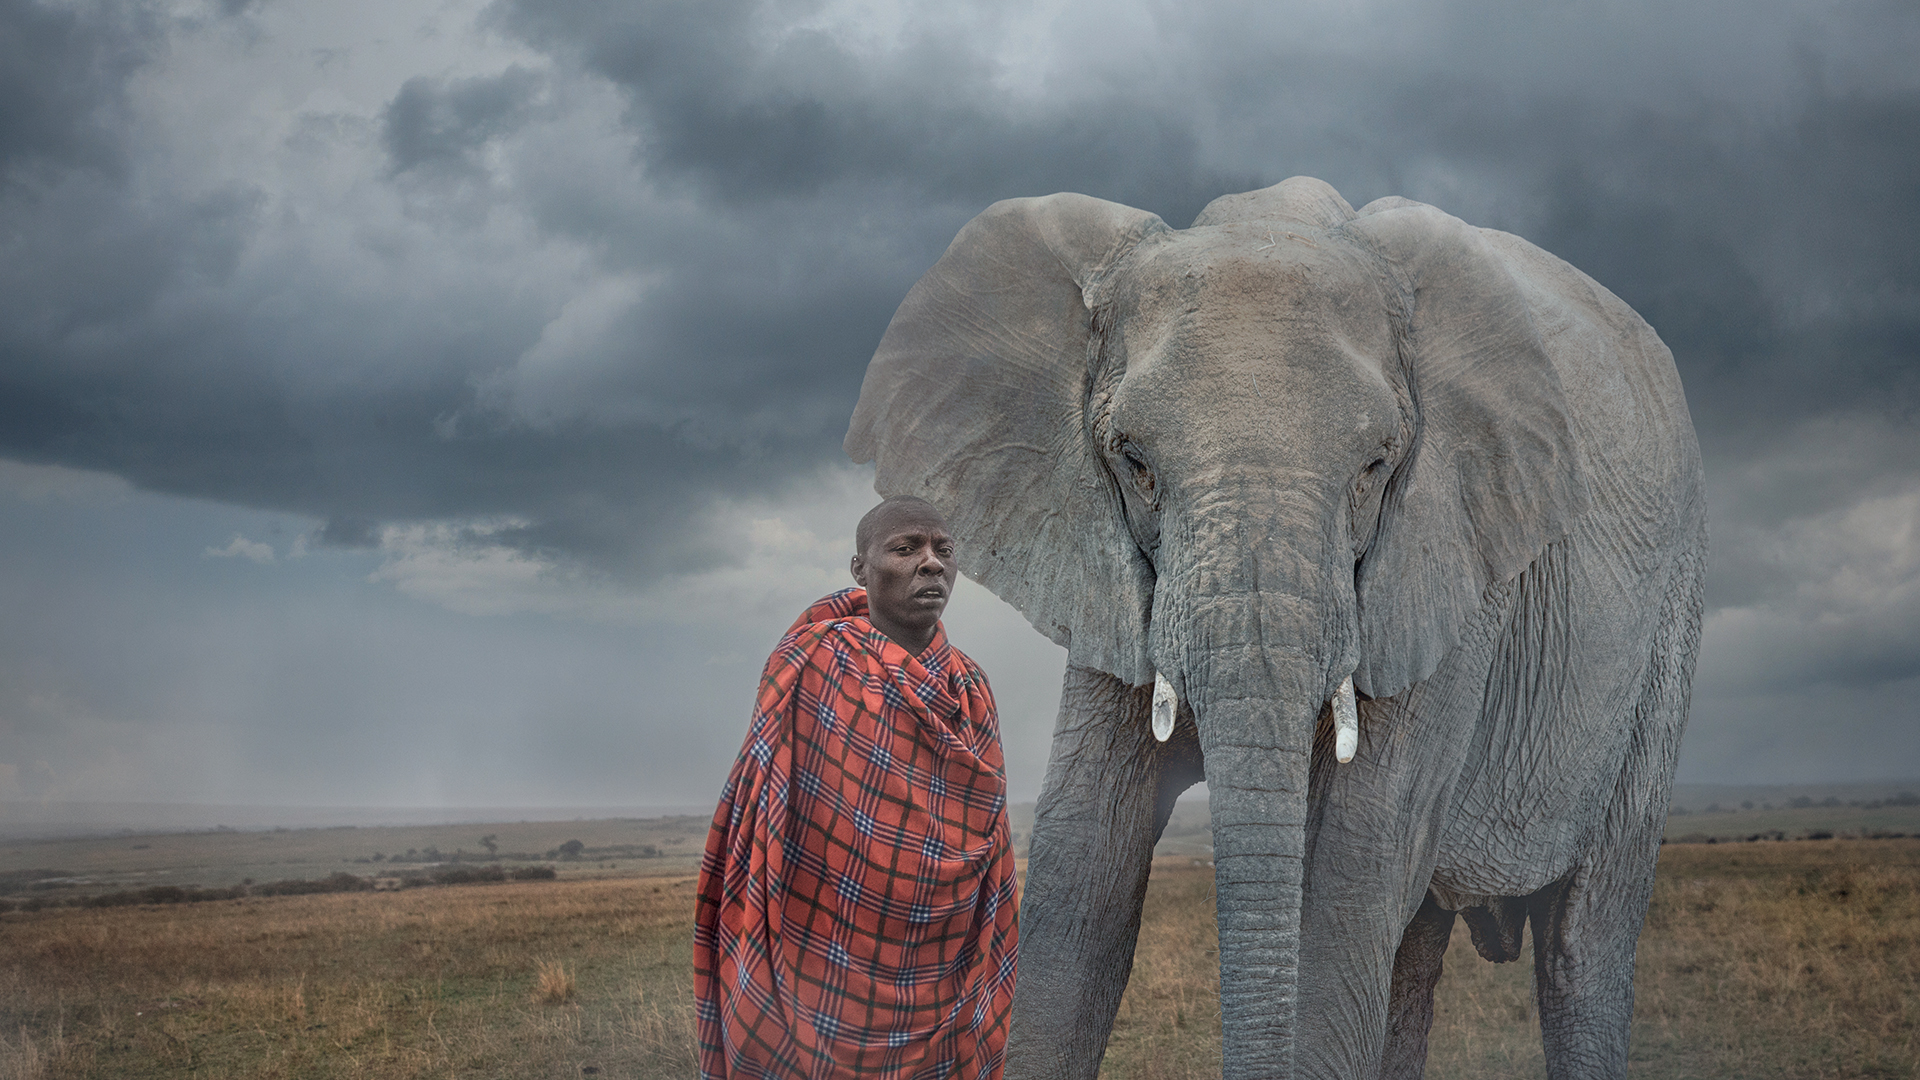 A Maasai tribesperson in red robes is superimposed standing next to an African elephant in a stormy landscape